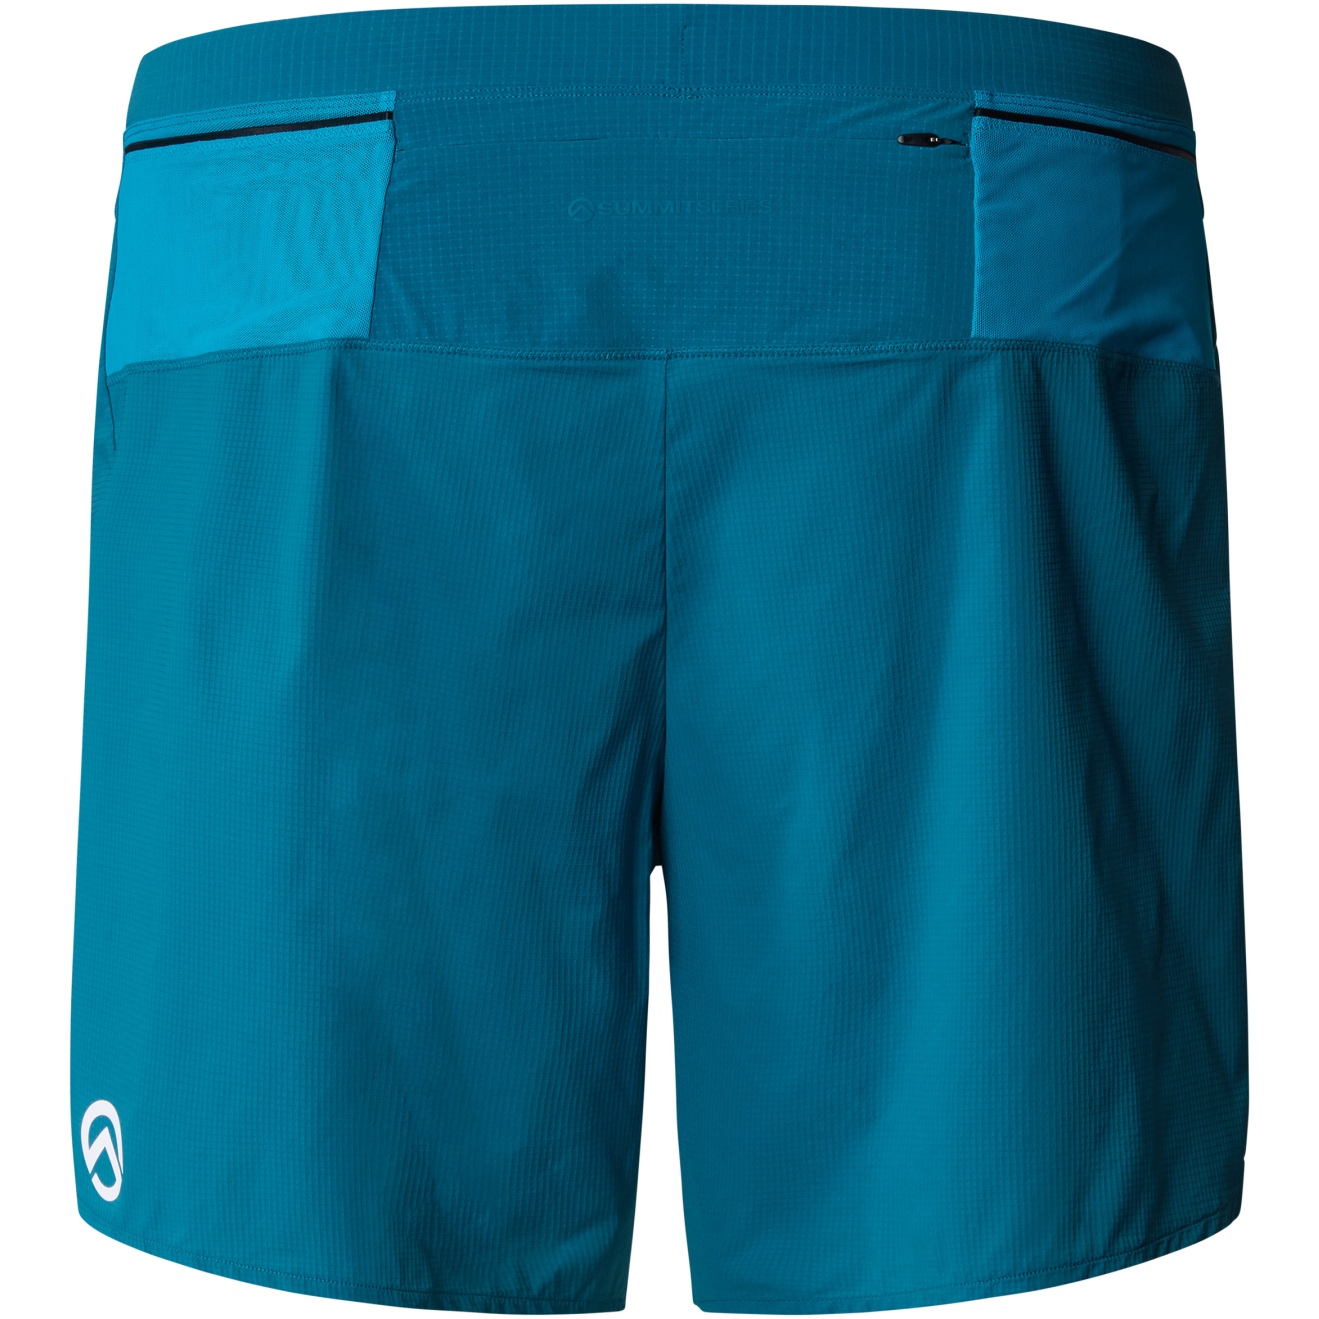 Essential Cycling Shorts with Pockets - Sapphire Blue